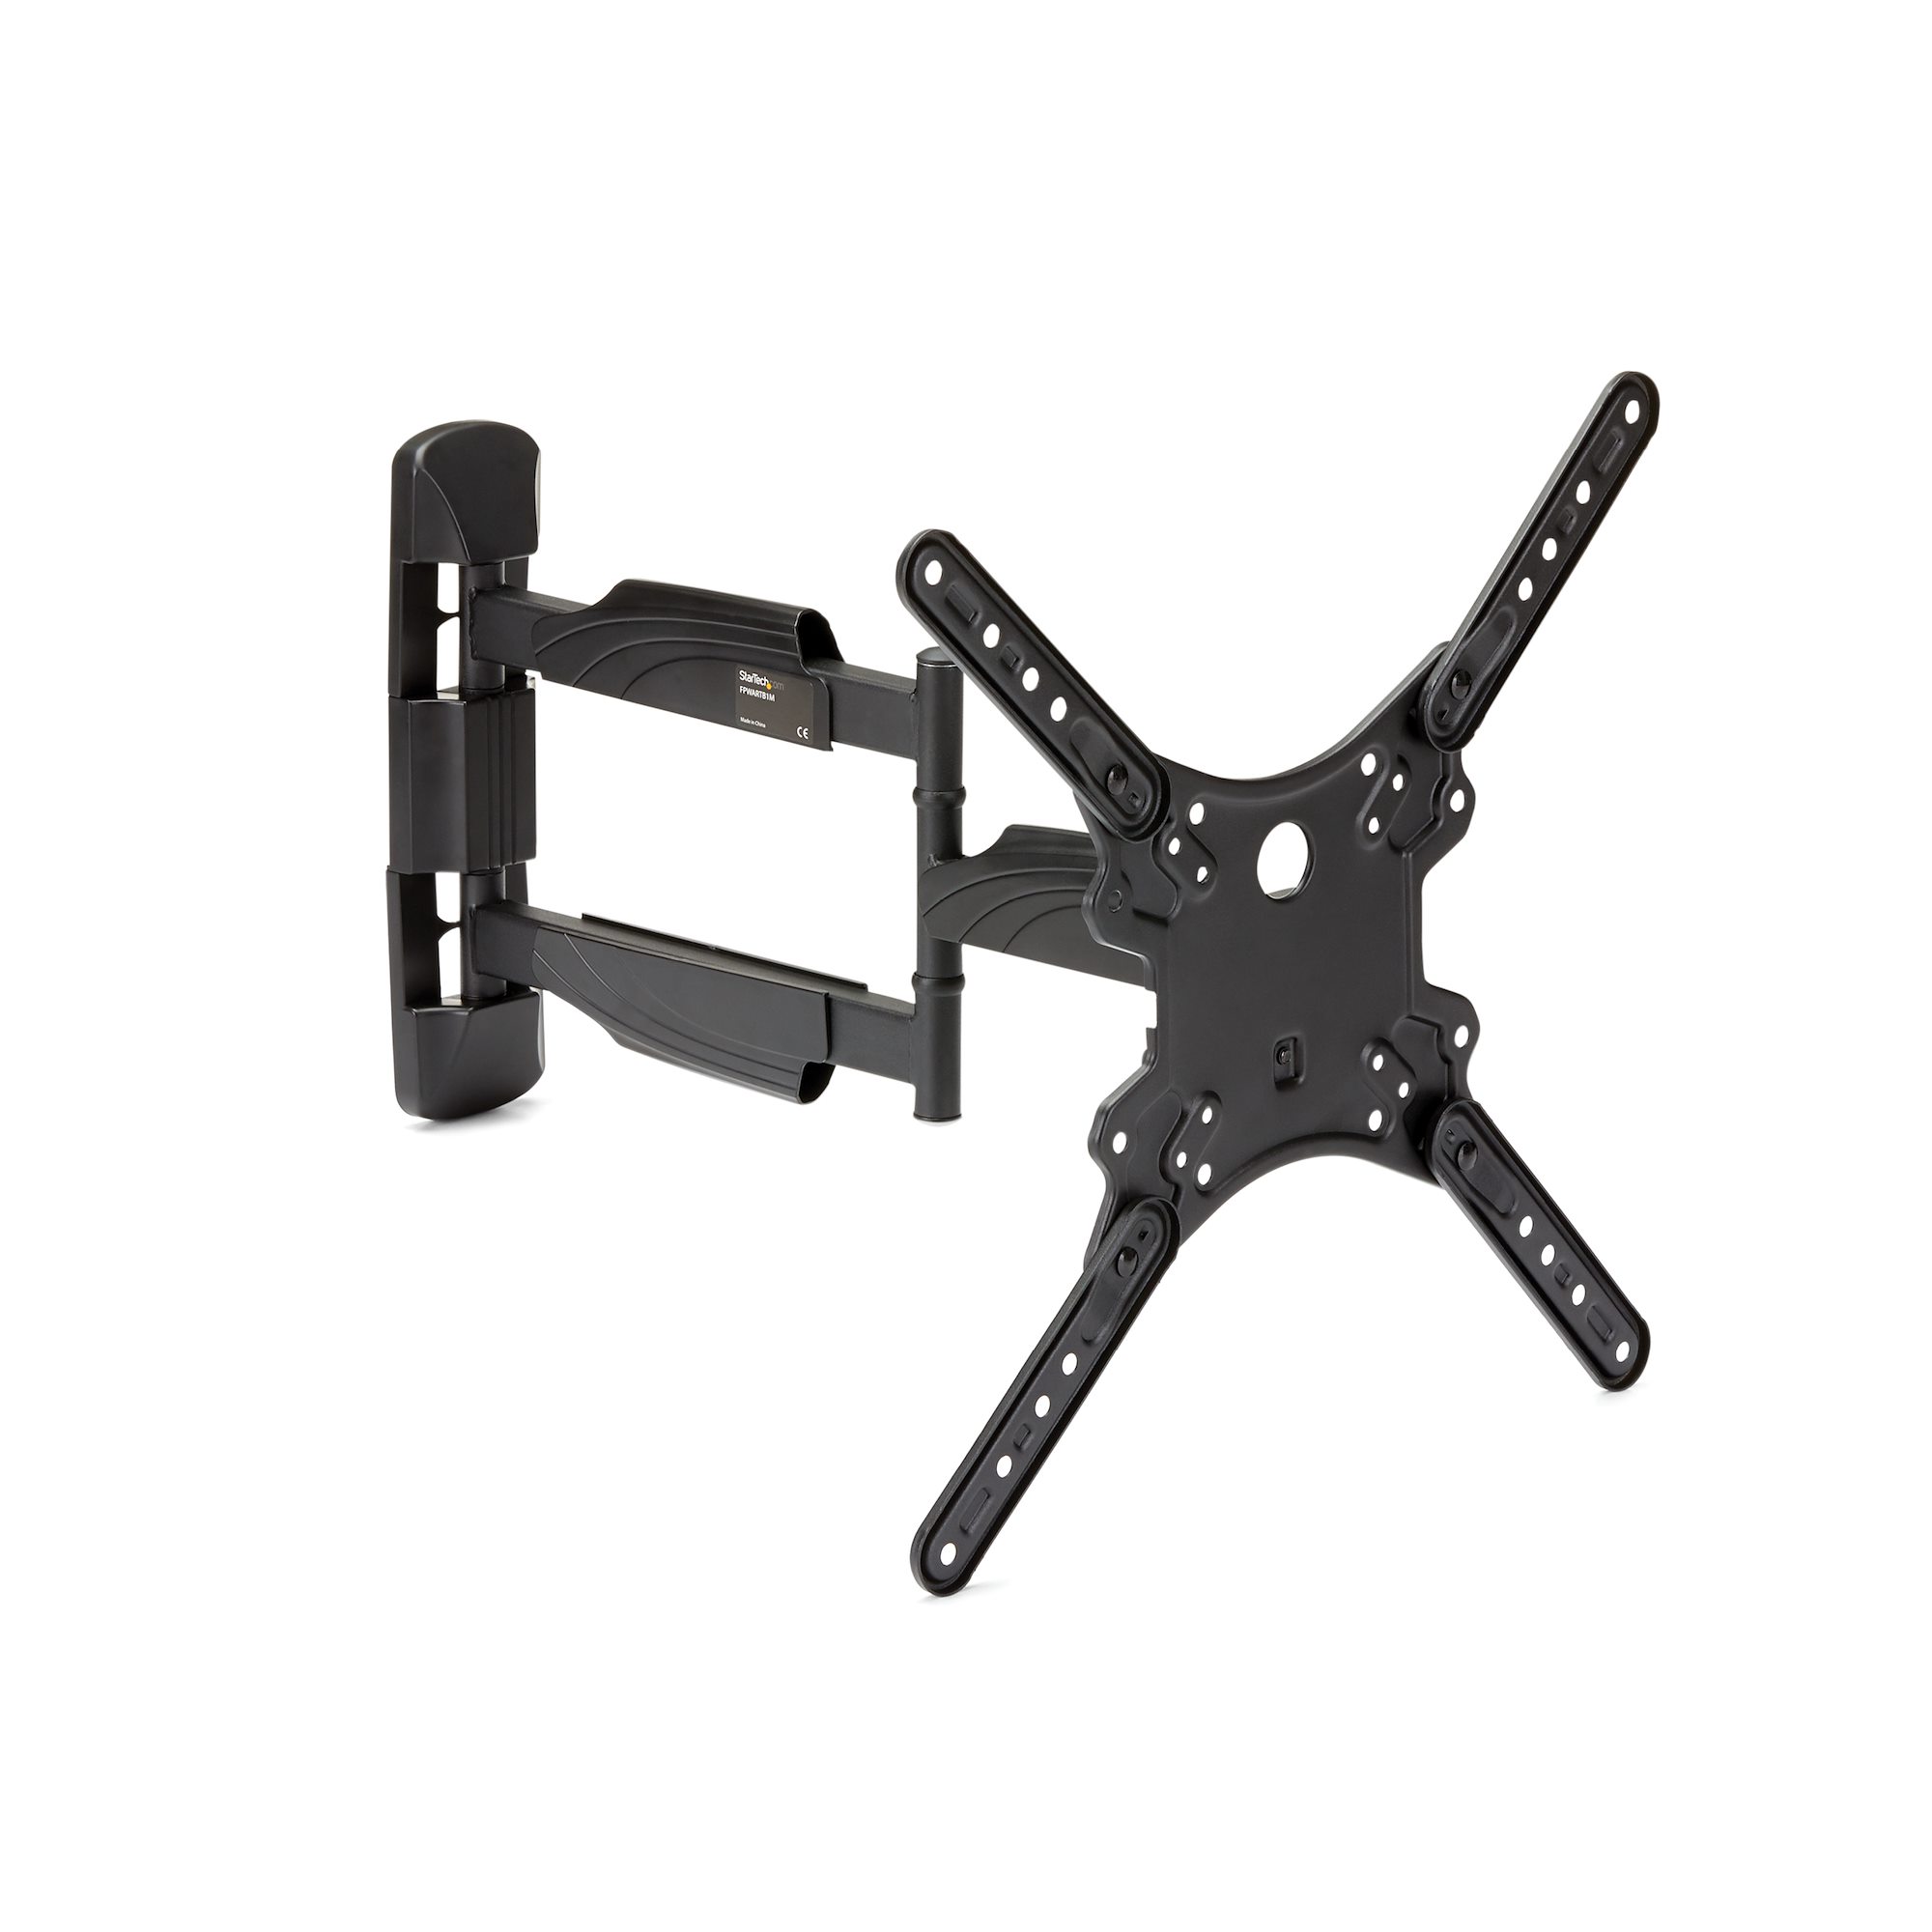 4K TVs-Fit for 24,30,32 50,55 TV with VESA Up to 400x400mm-Weight Capacity Up to 88lbs UL List by EVERVIEW 37,40,42 OLED Full Motion Swivel Articulating Tilt TV Wall Mount Bracket for 23-55 LED 